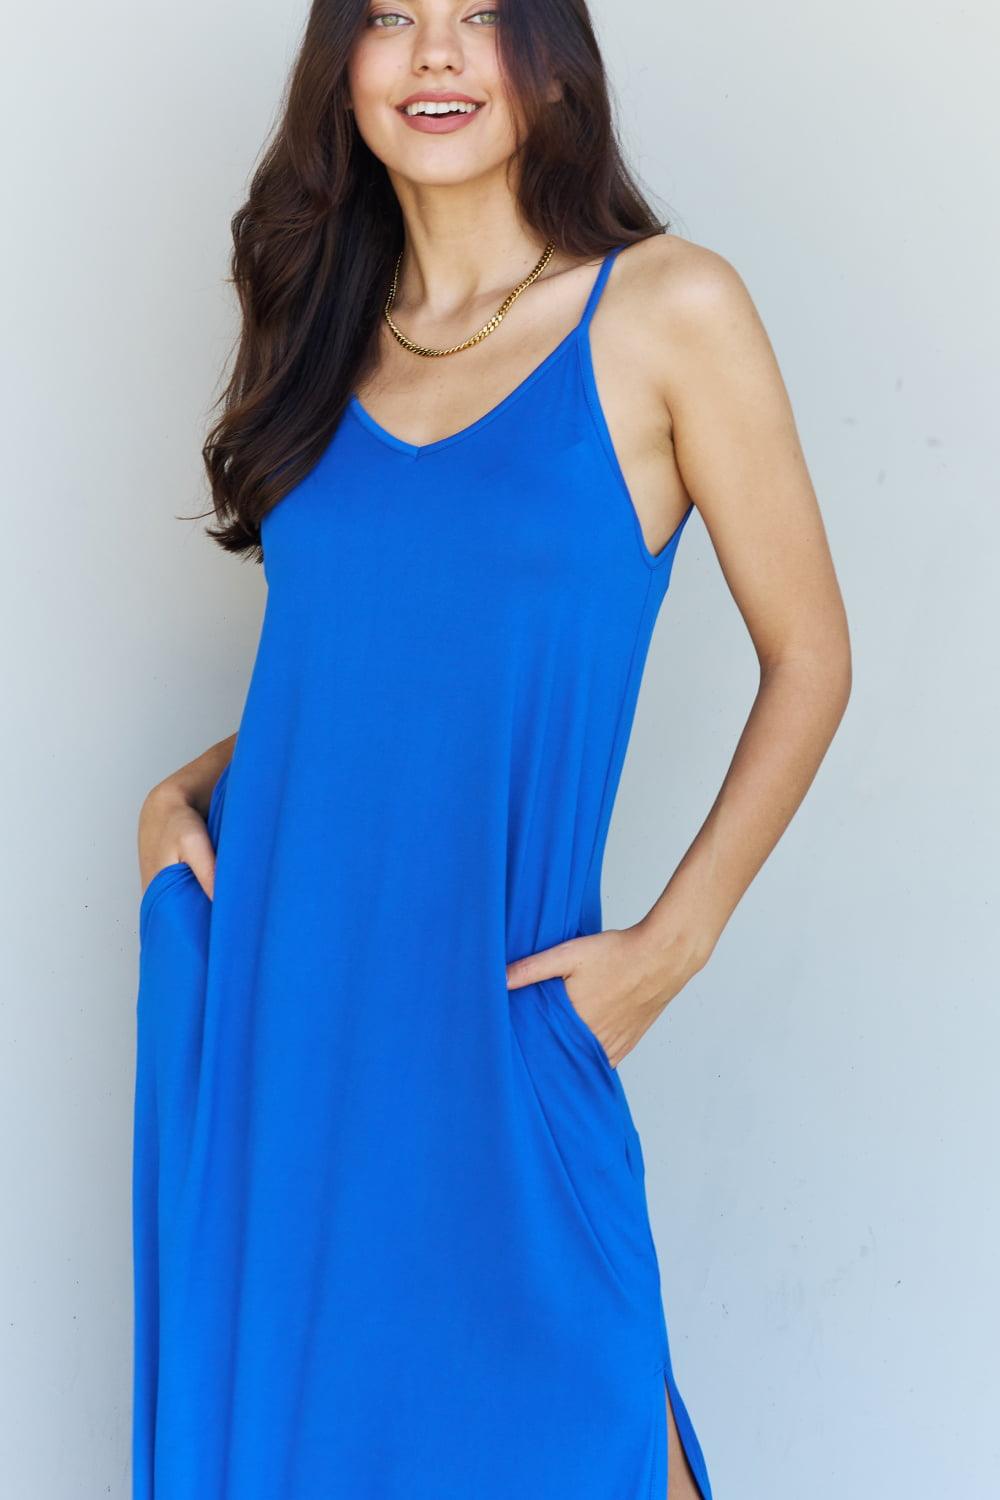 Ninexis Good Energy Full Size Cami Side Slit Maxi Dress in Royal Blue - Crazy Like a Daisy Boutique